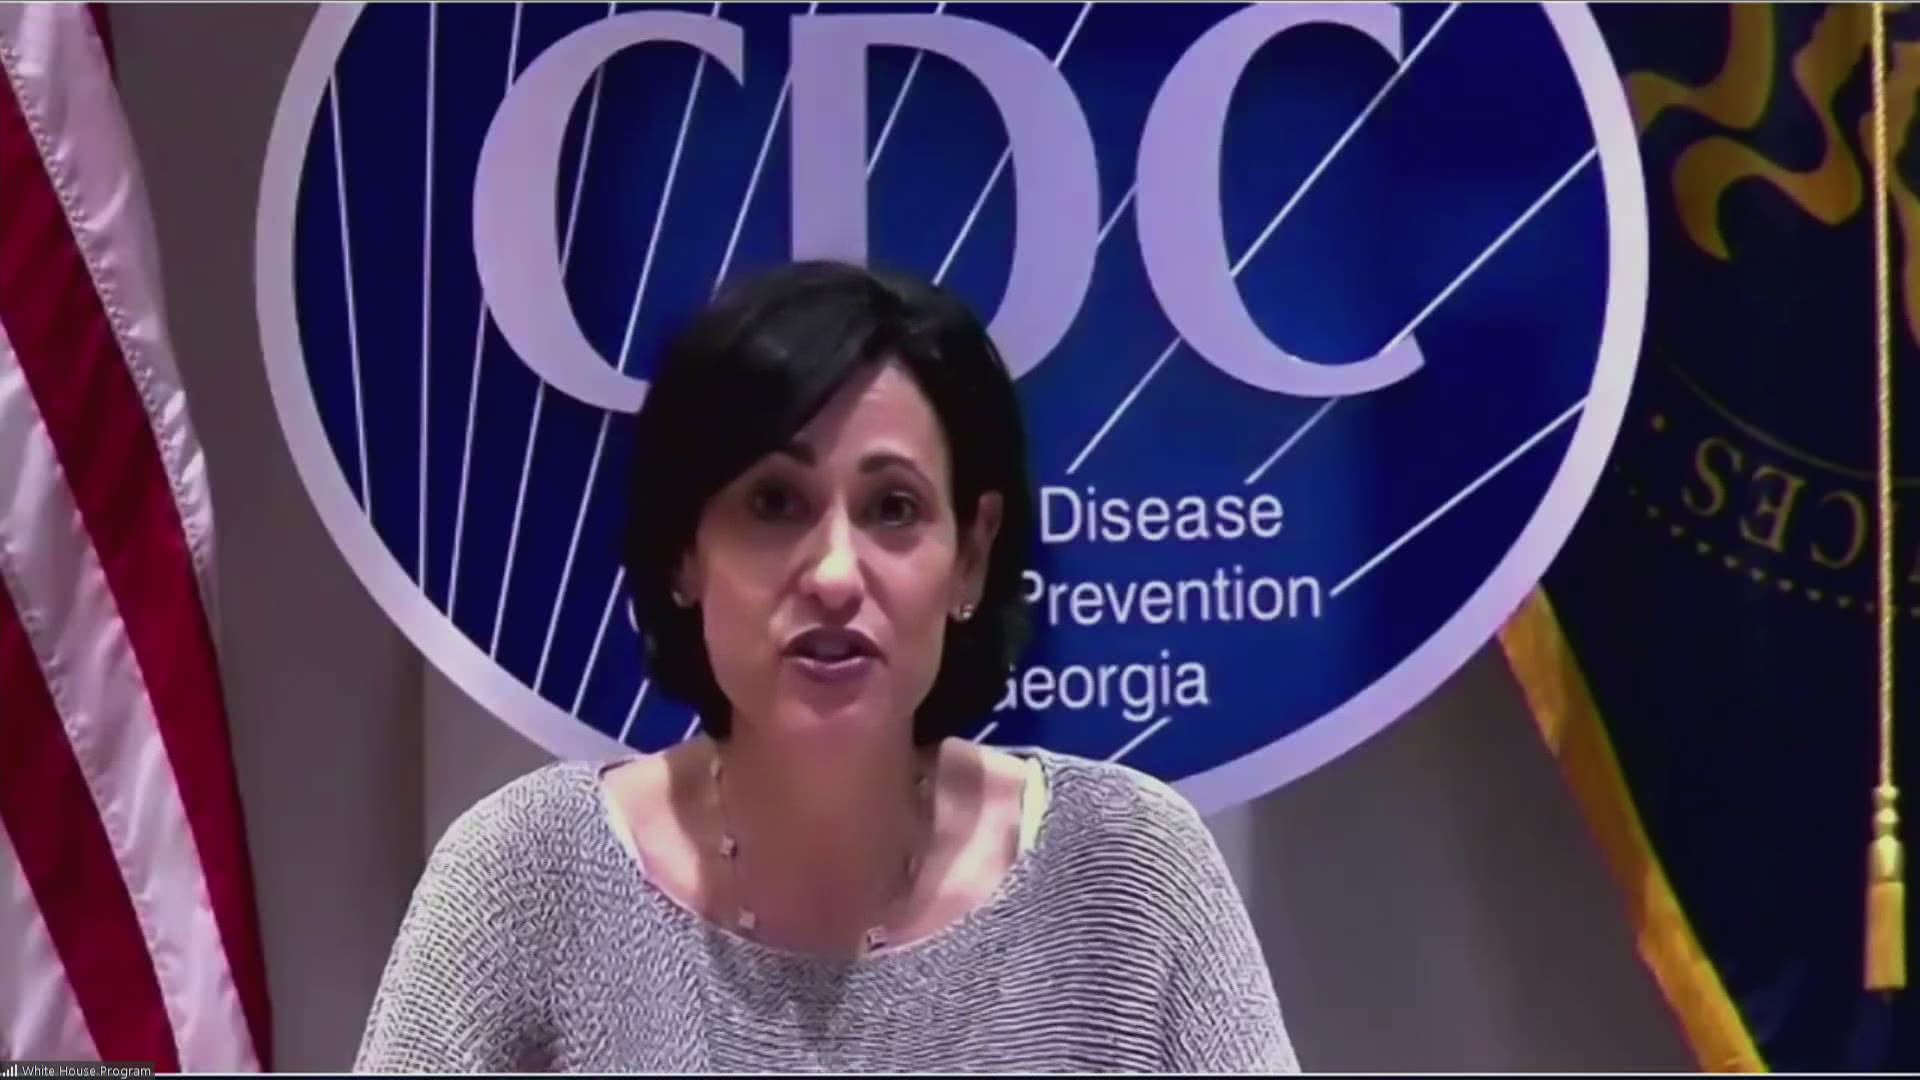 CDC Director Dr. Rochelle Walensky updates the public on the United States' efforts to curb the coronavirus pandemic and safely get life back to normal.